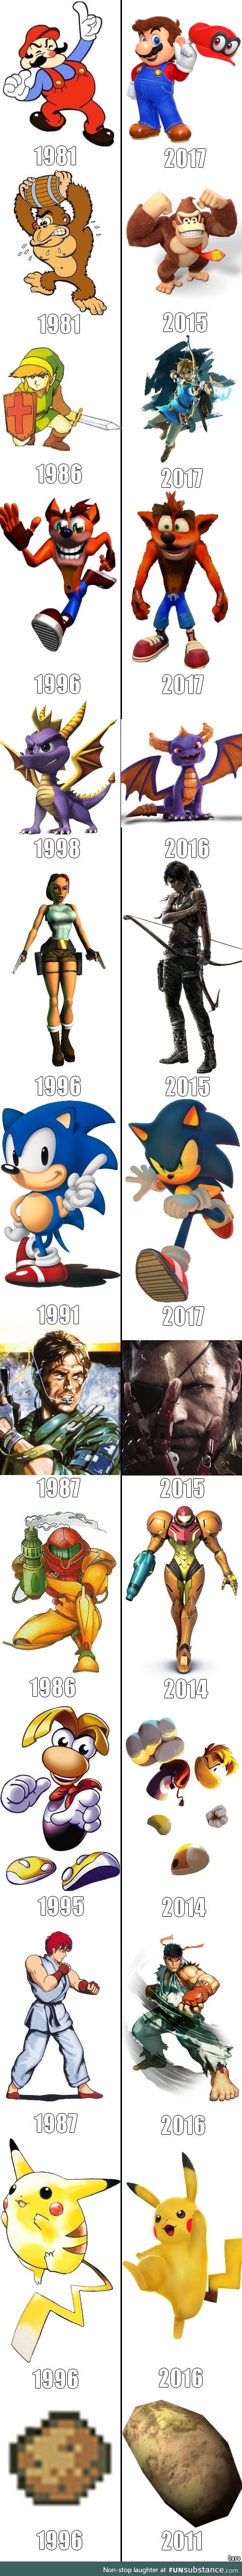 Videogame artworks over the years